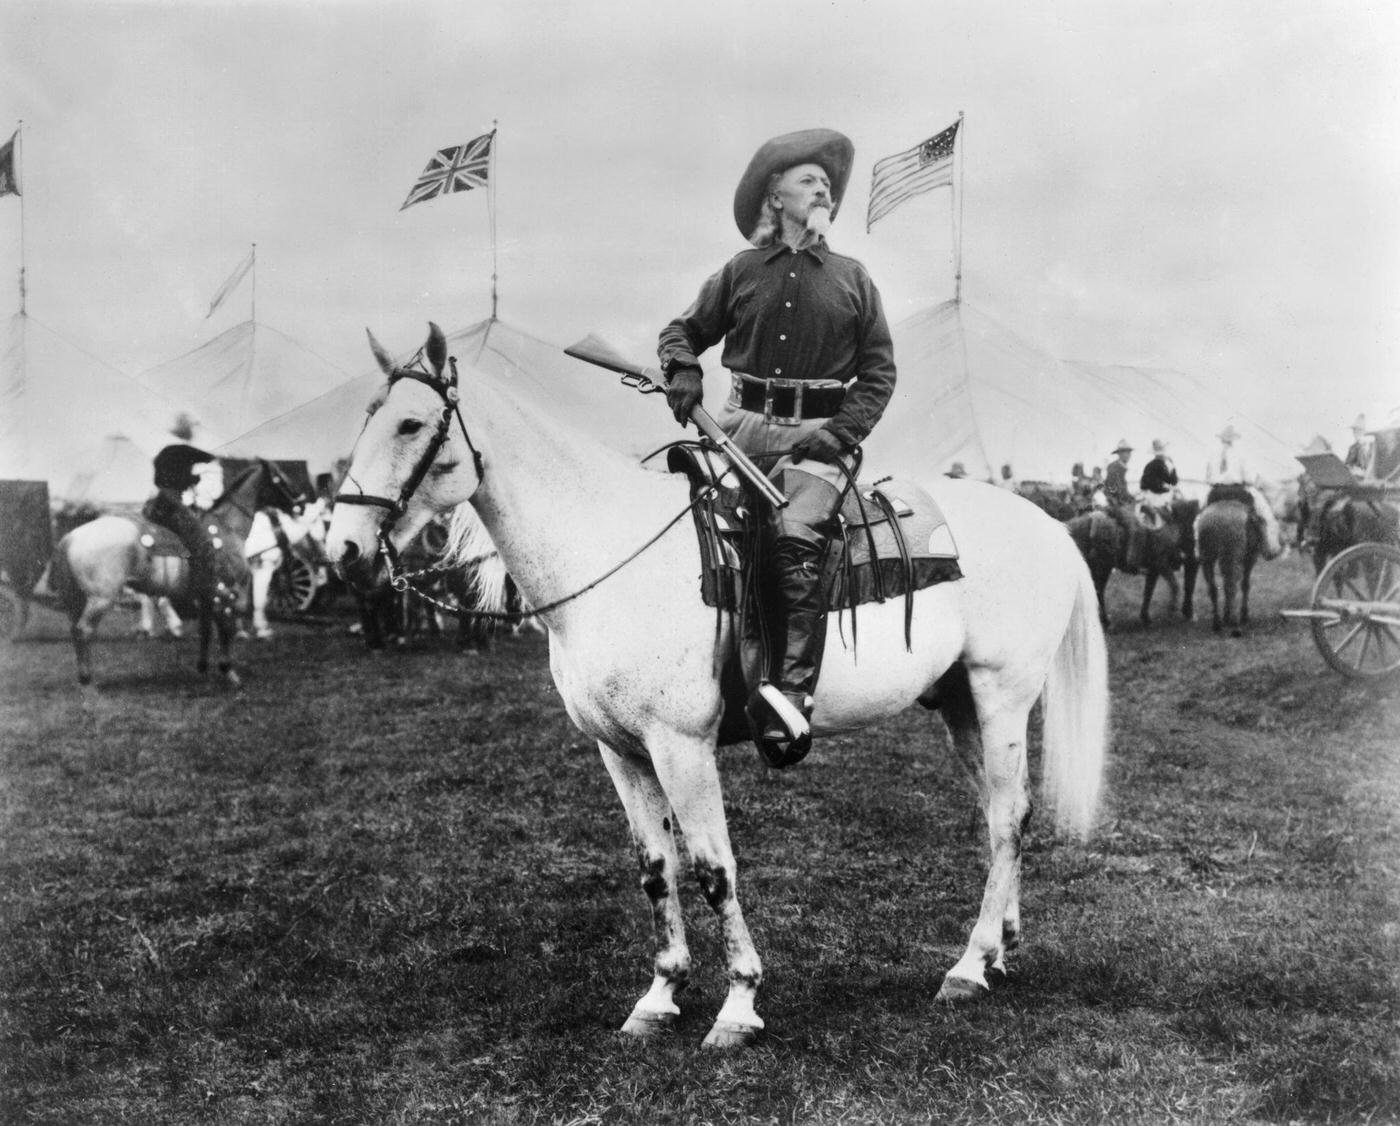 William 'Buffalo Bill' Cody (1846 - 1917) American entertainer, sitting on horseback and holding a rifle, looks off into the distance as British and American flags fly around him. Tents for his Wild West show are in the background.